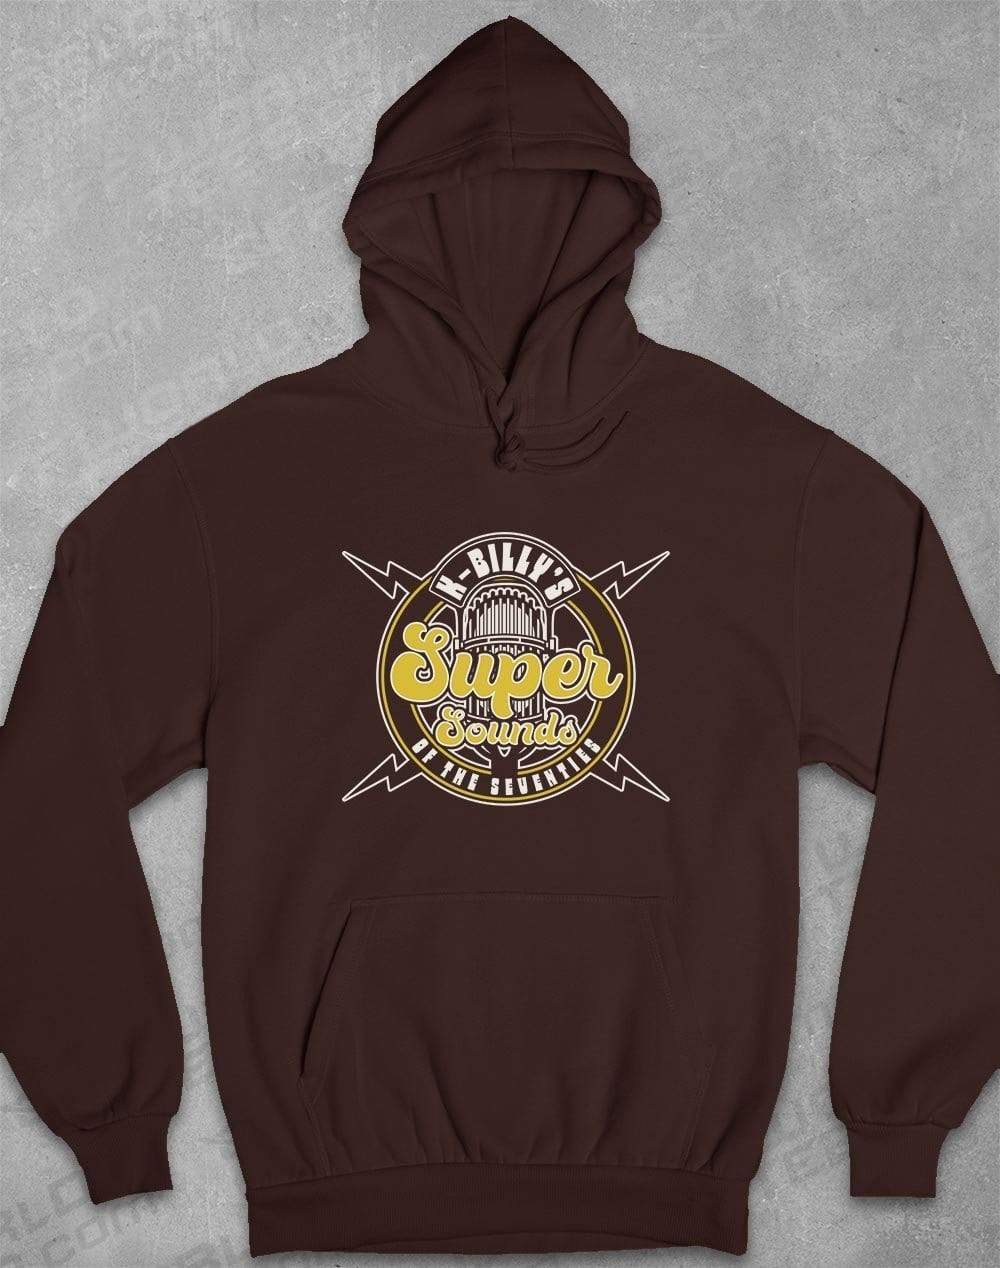 K-Billy's Super Sounds Hoodie S / Hot Chocolate  - Off World Tees